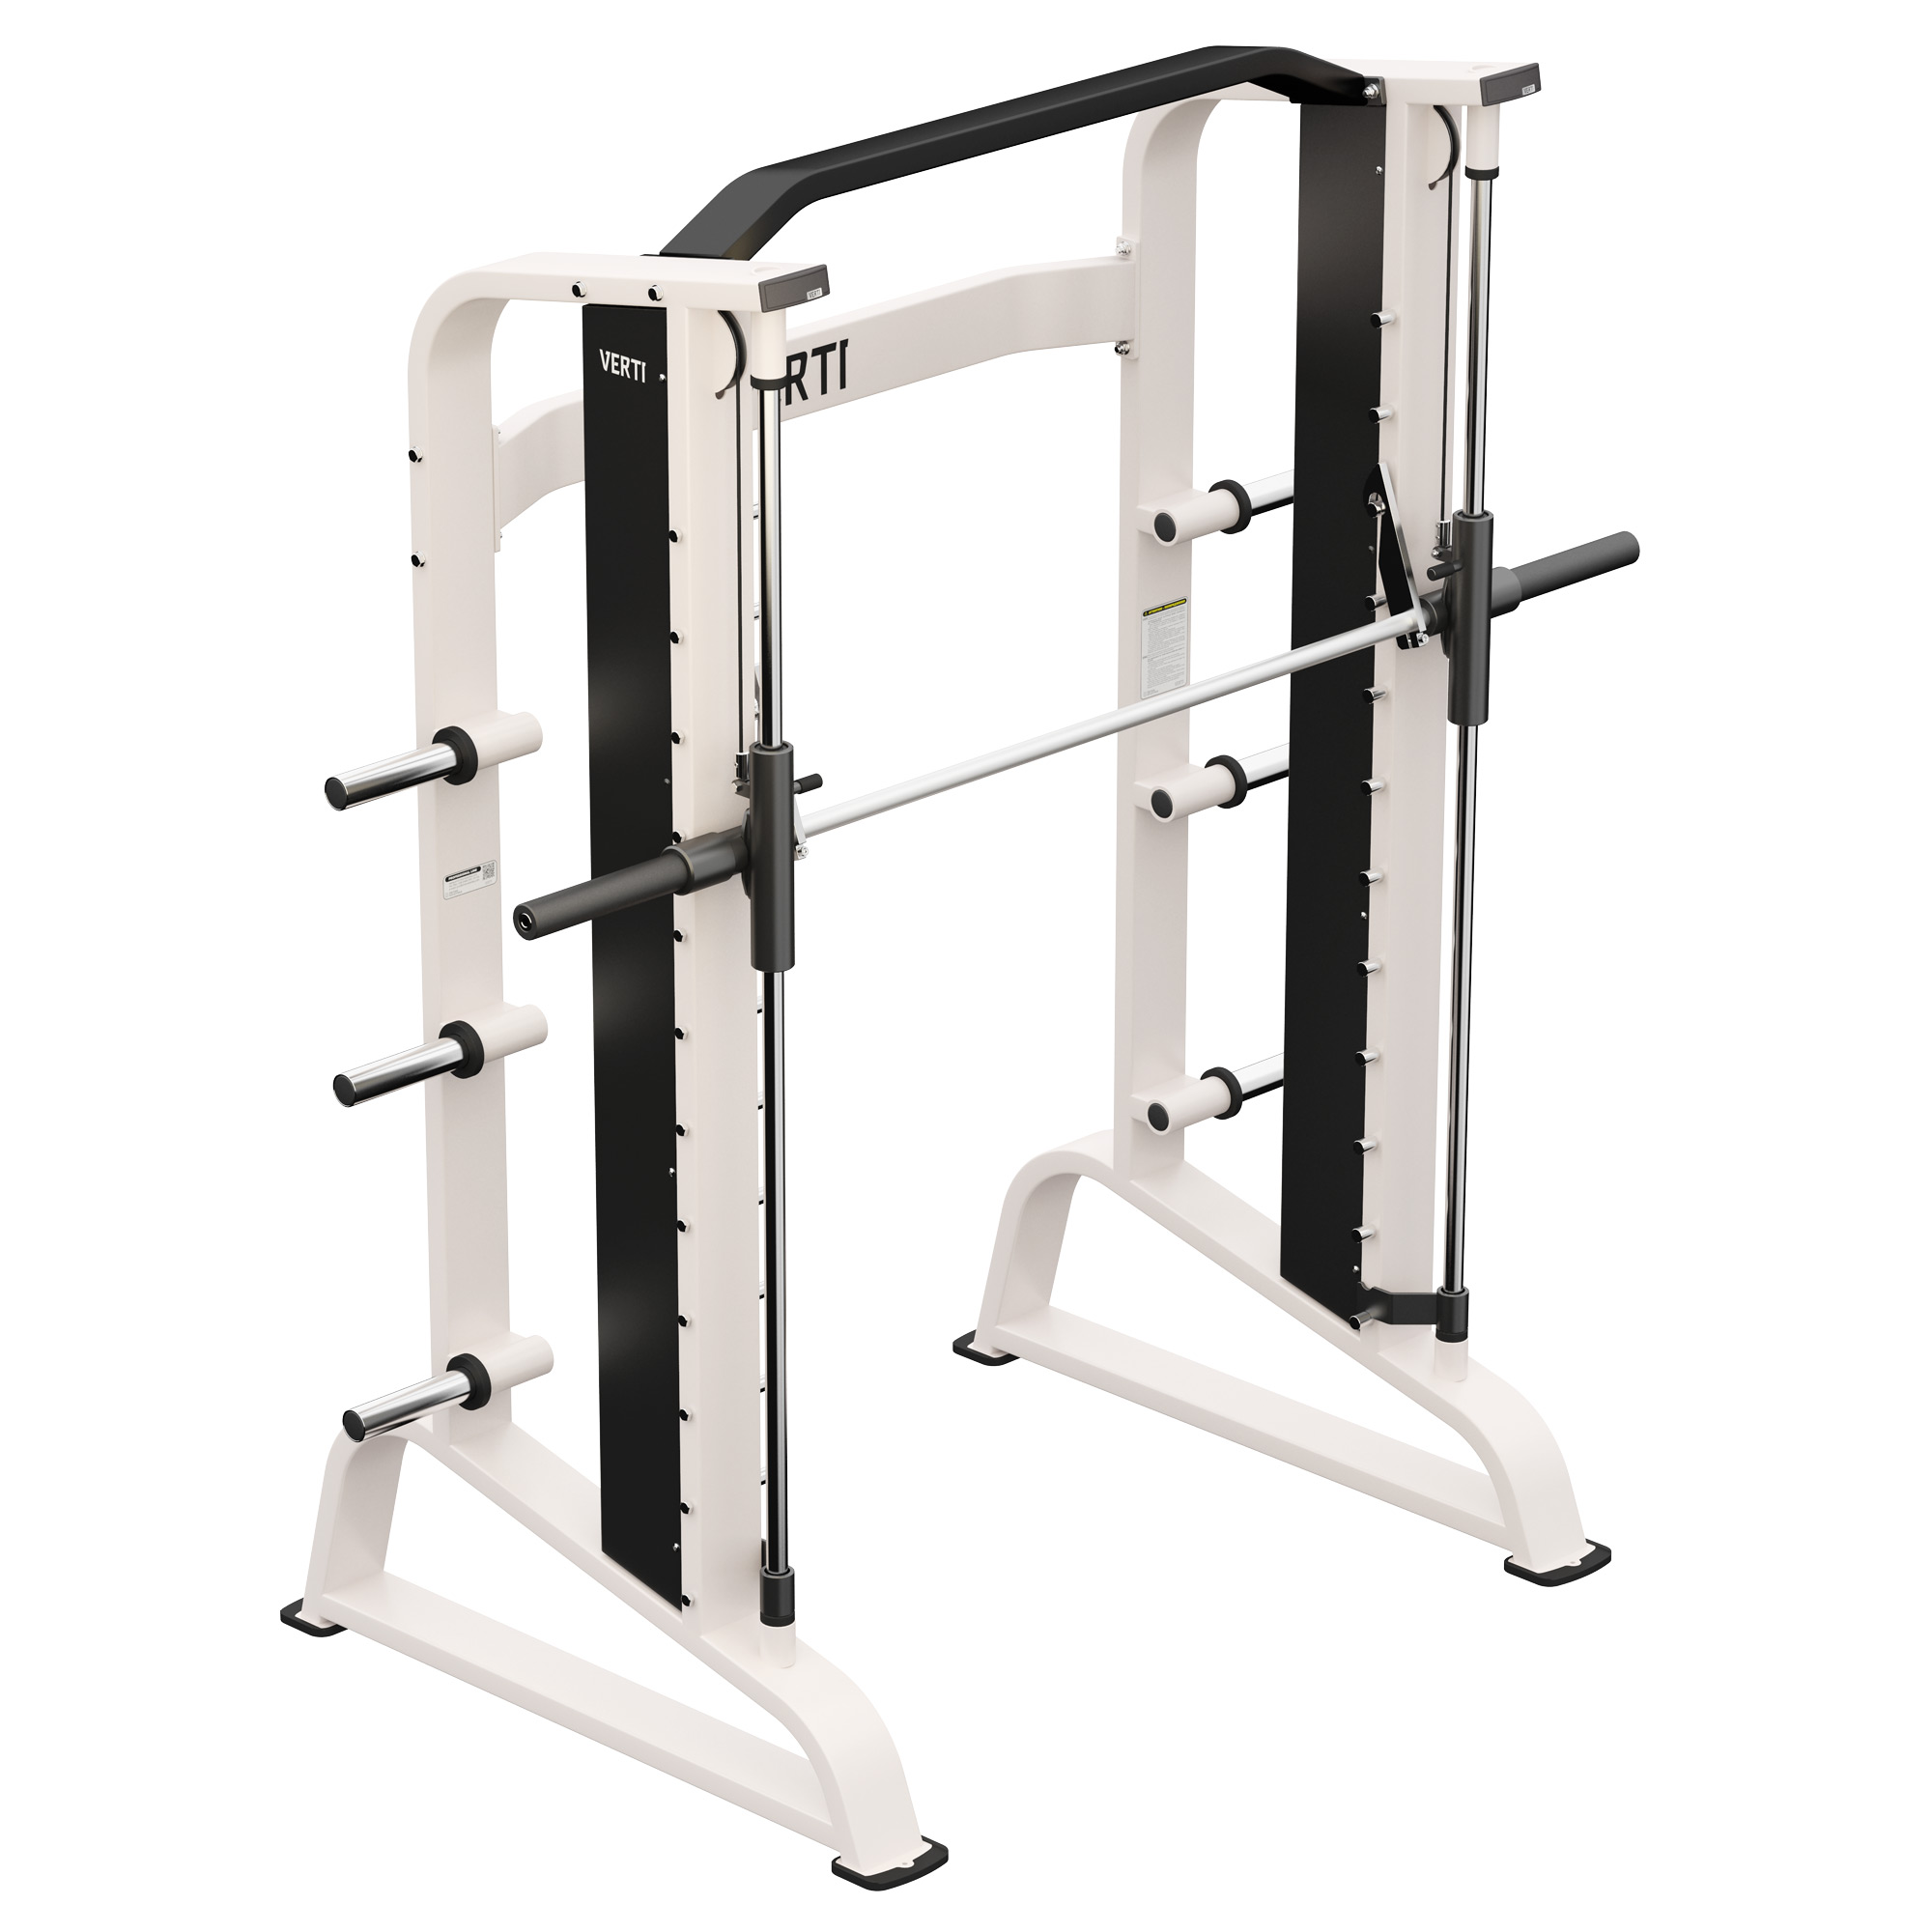 Buy Smith Machine, with counterweight Inter Atletika V217 in